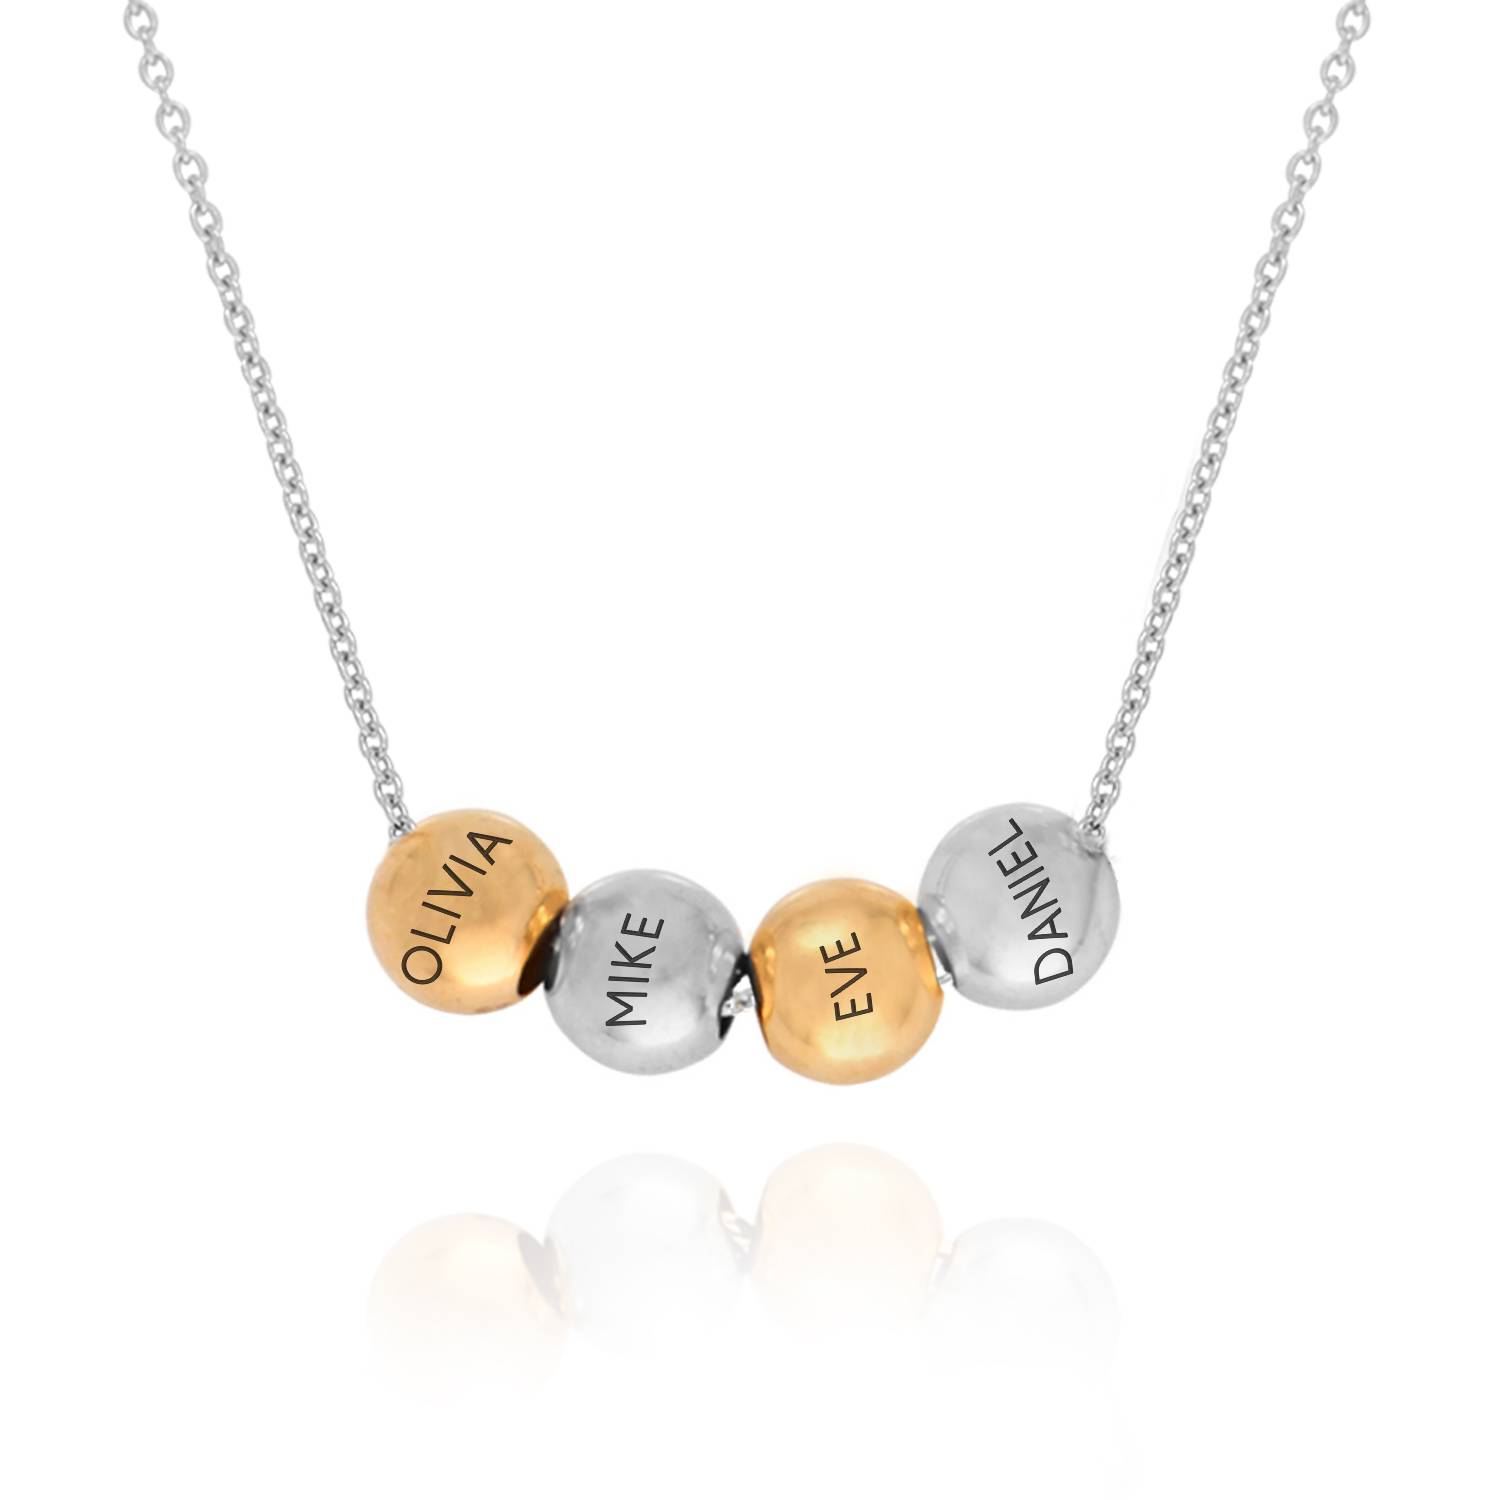 Mixed Metals Balance Charm Necklace with Sterling Silver Chain-1 product photo